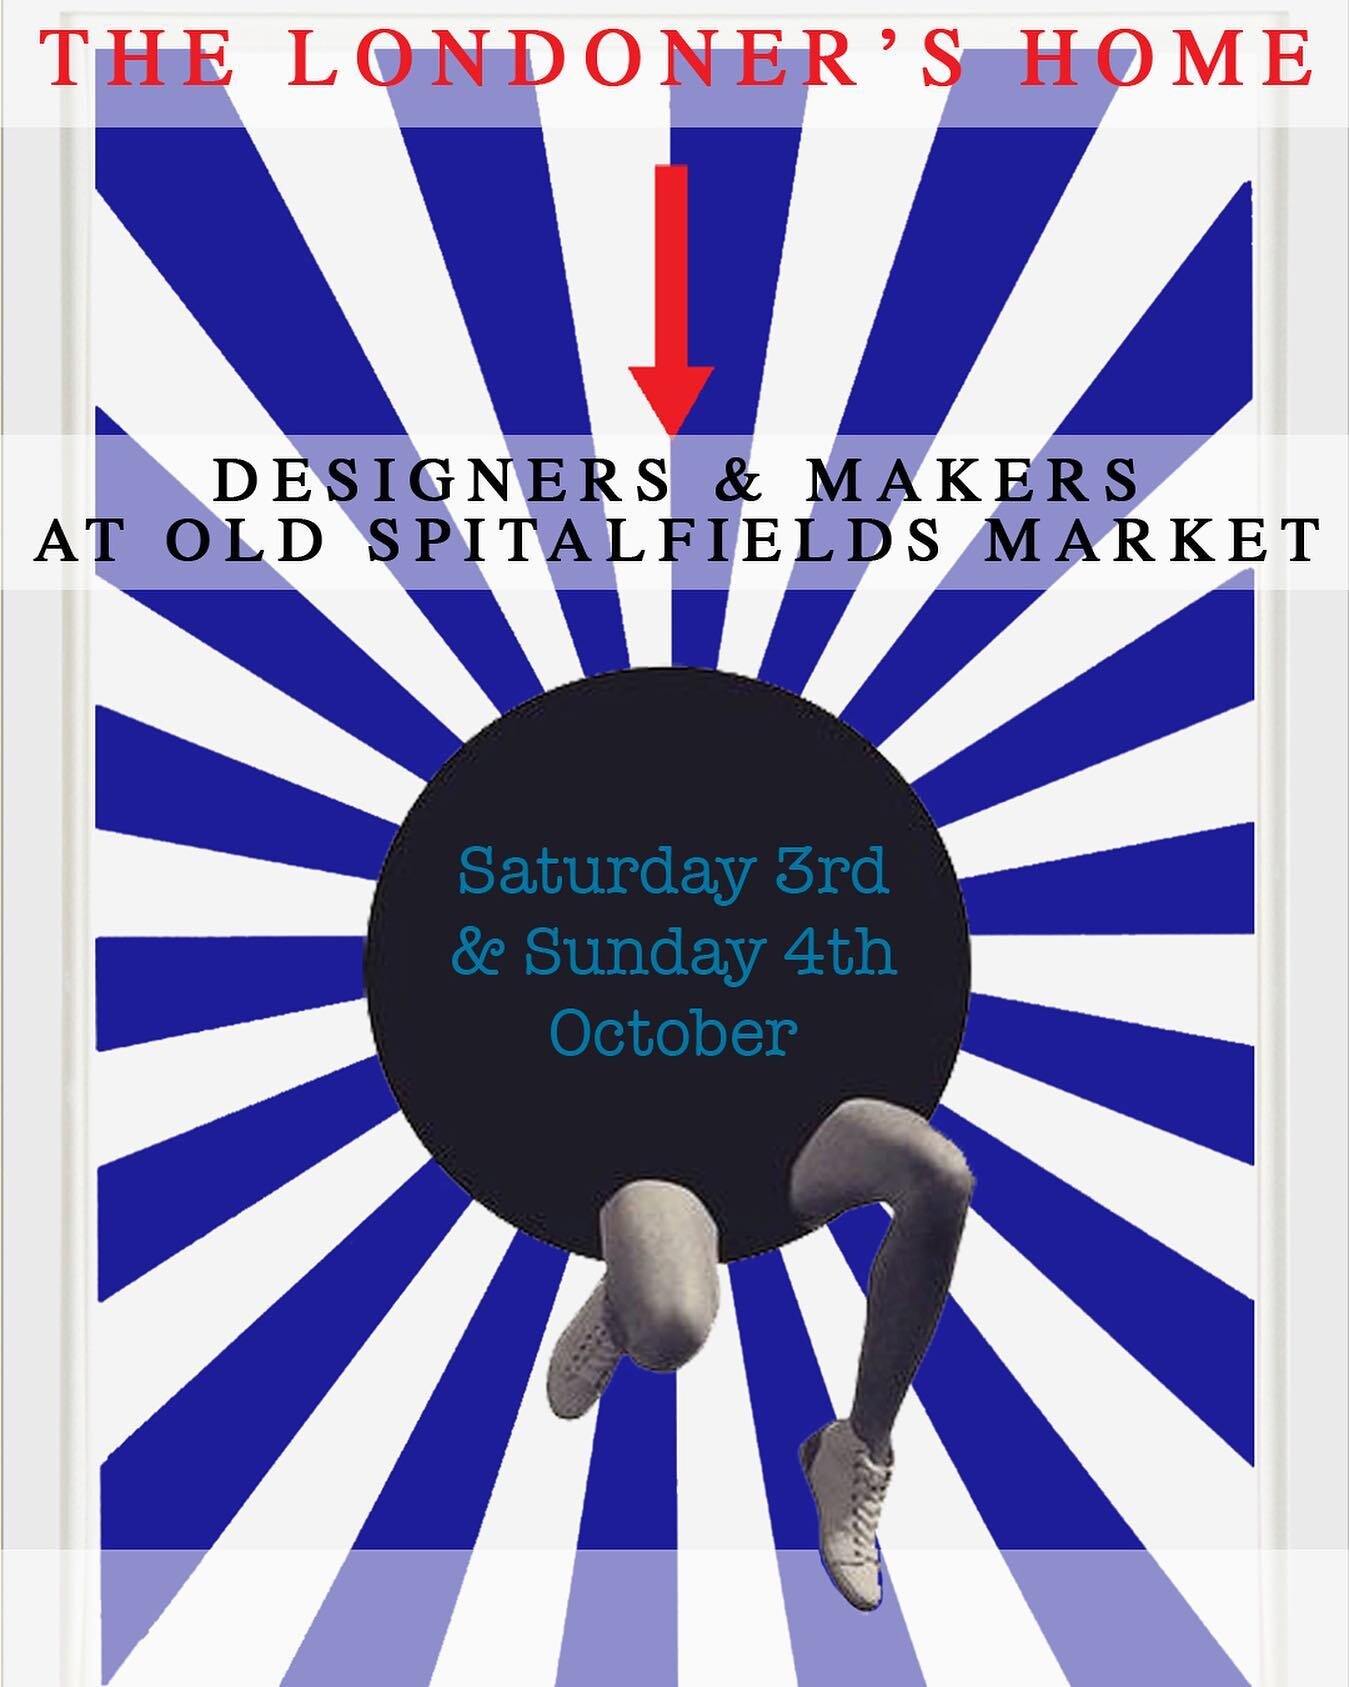 Many great artisans, artists, designers and makers showcasing their works for sale at @oldspitalfieldsmarket - Come along and enjoy the sellers, atmosphere, food and London life with plenty of space to keep your social distancing and stay safe. New m